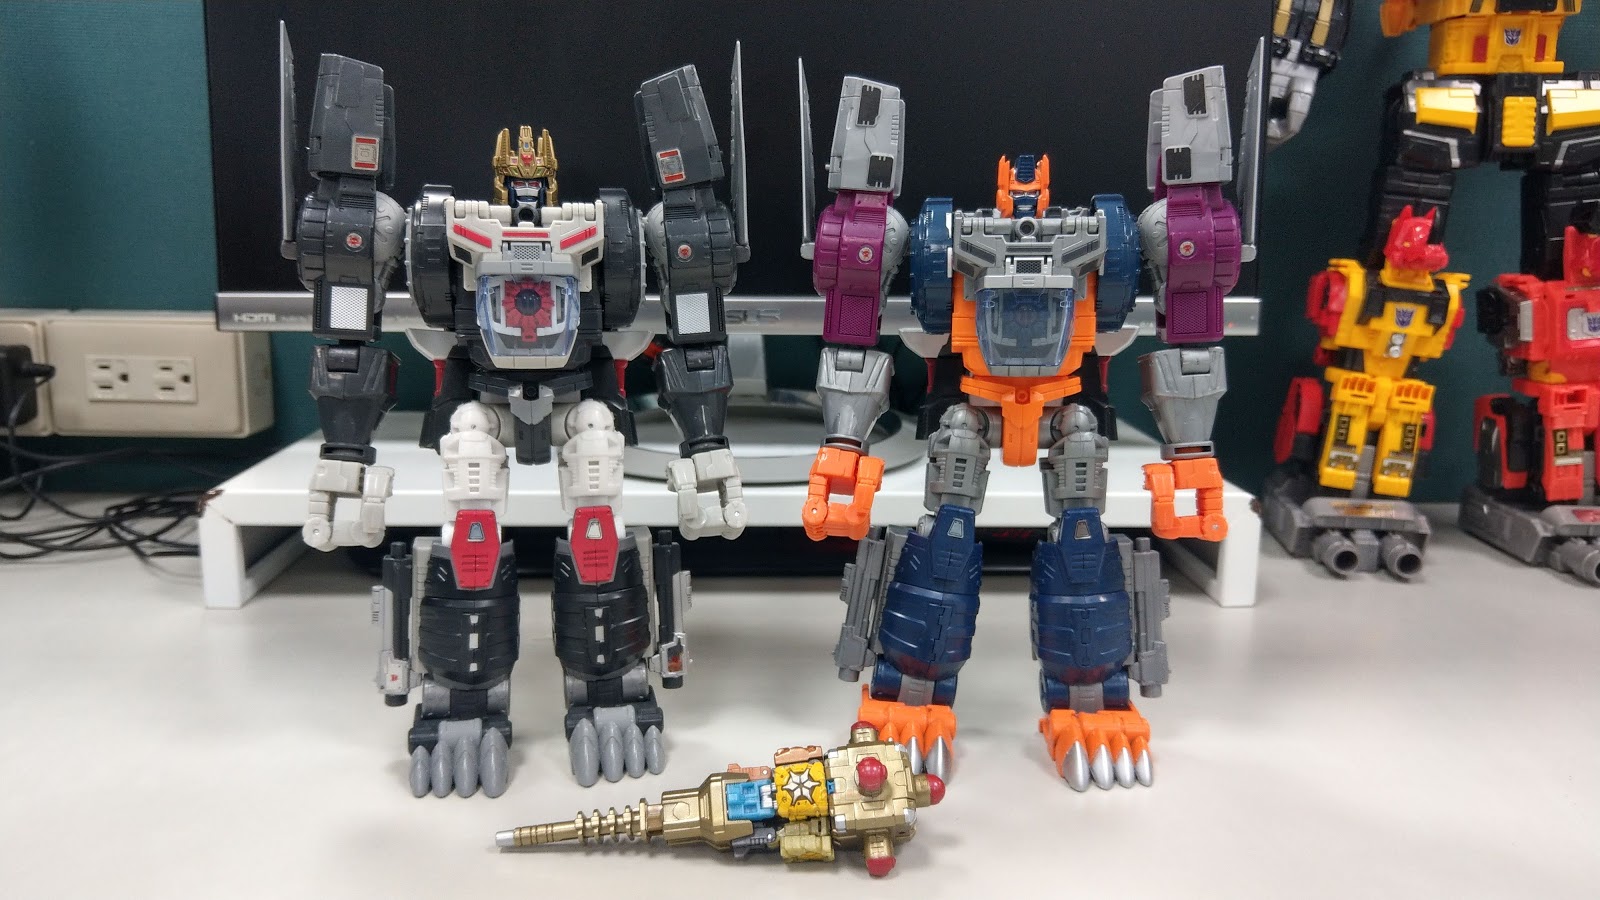 transformers throne of the primes